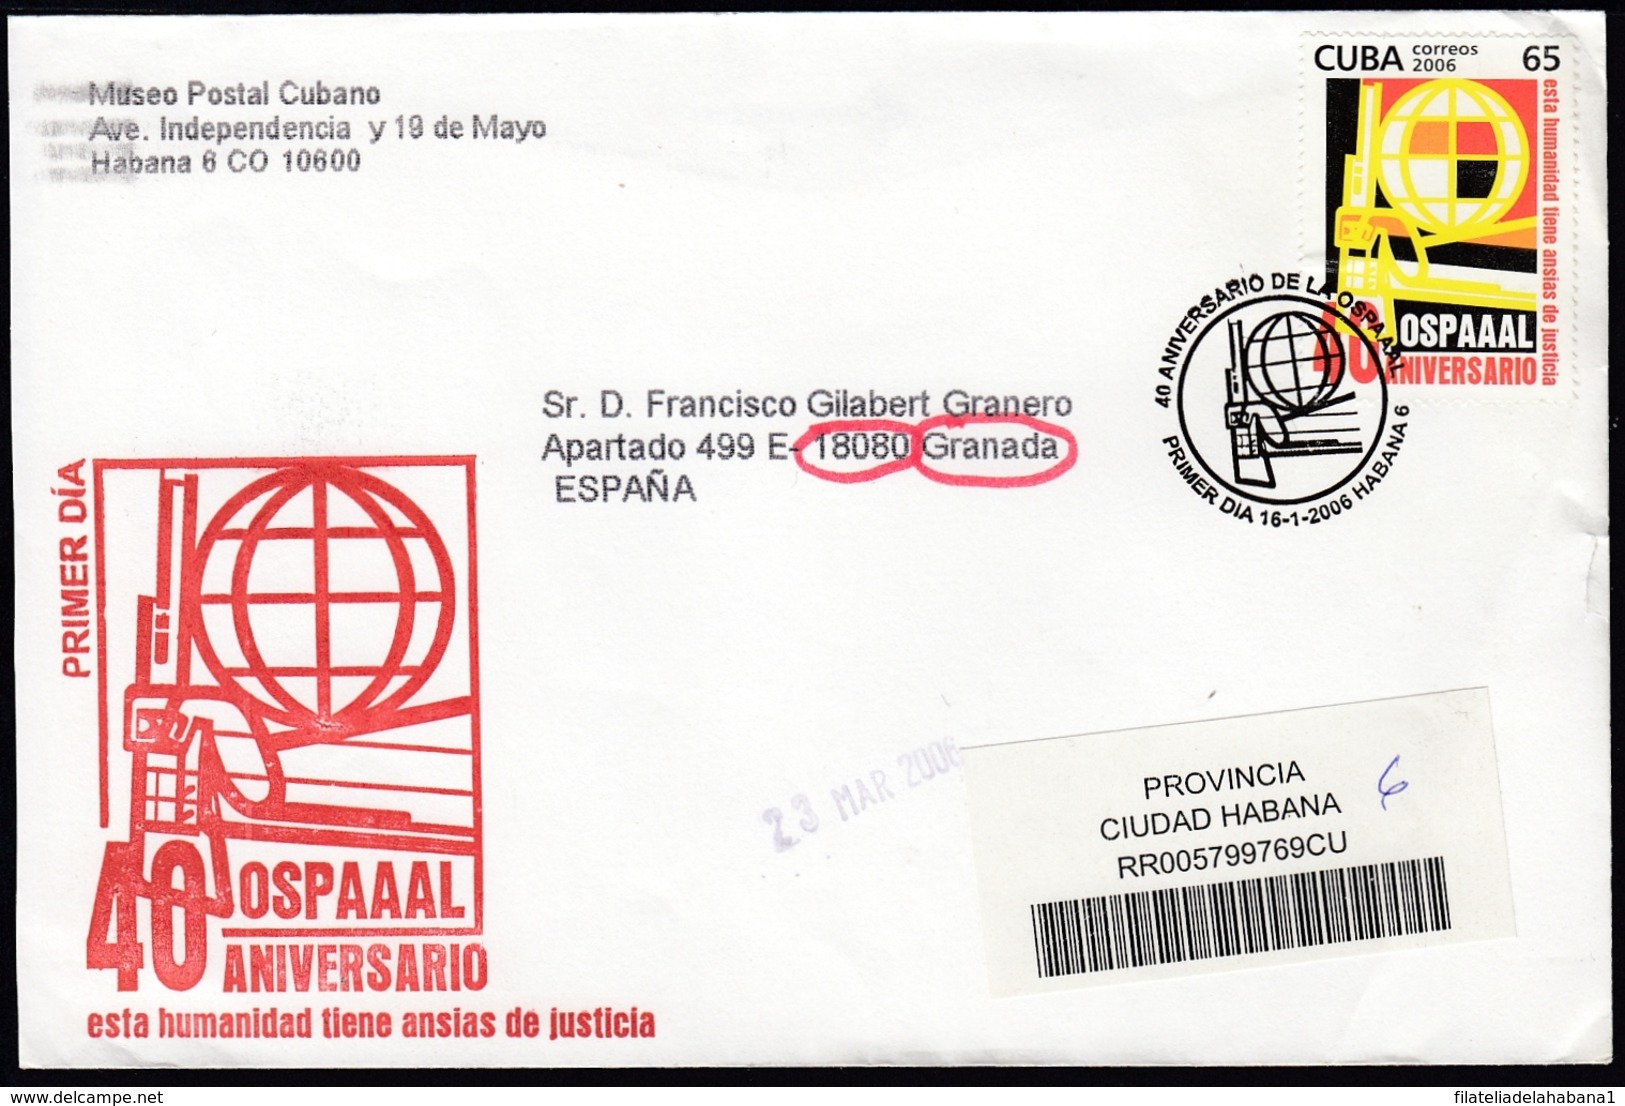 2006-FDC-132 CUBA FDC 2006. REGISTERED COVER TO SPAIN. 40 ANIV OSPAAAL. - FDC